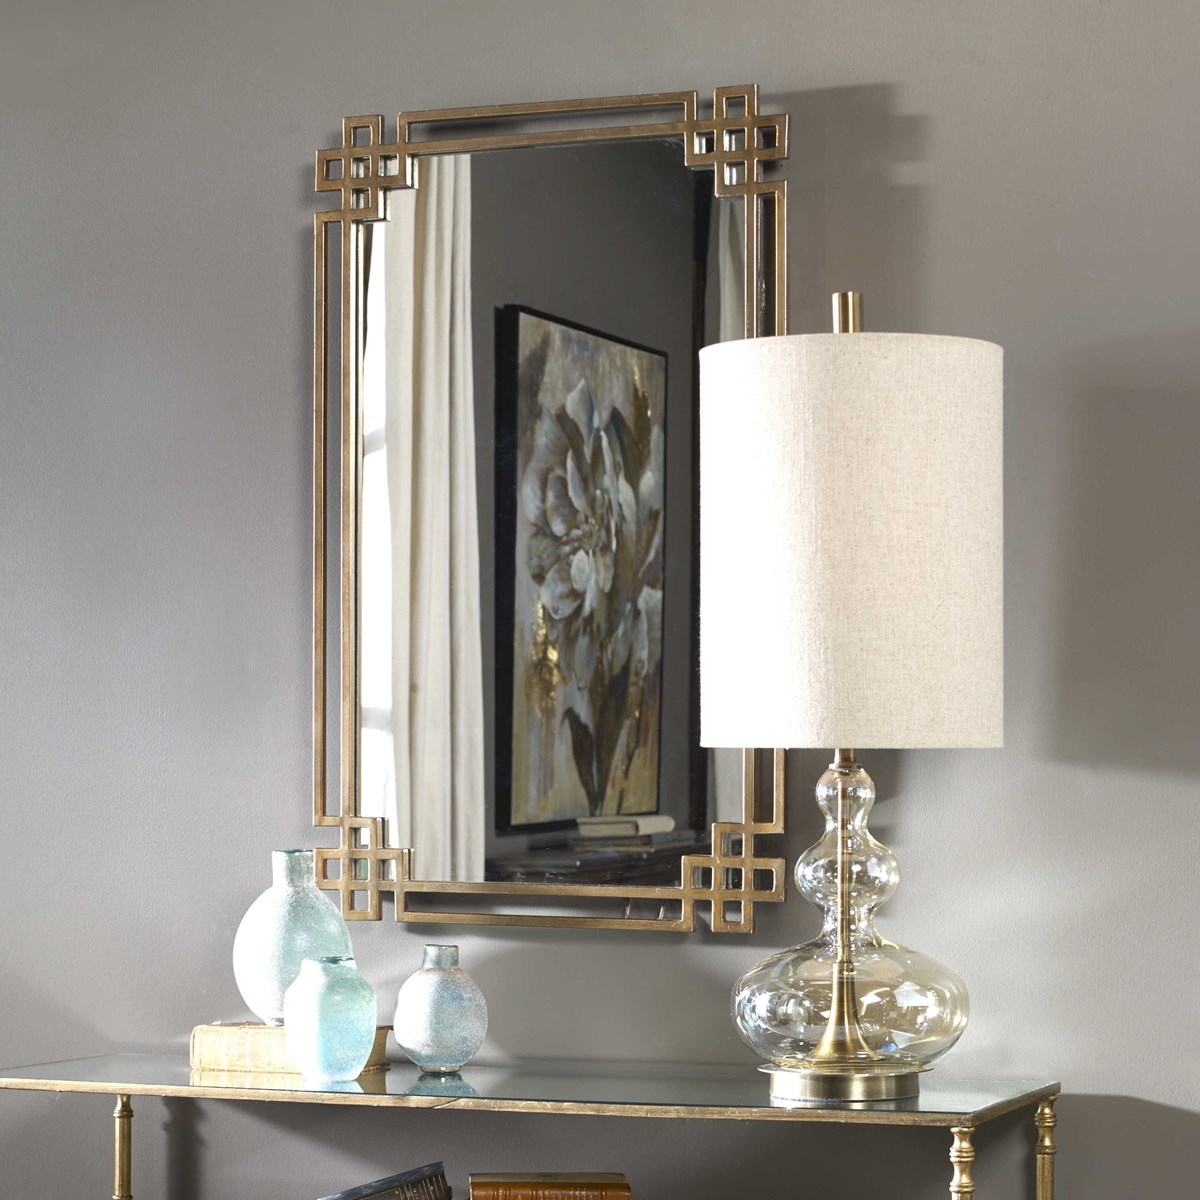 Devoll Classic Rectangle Wall Mirror, Gold - Image 2